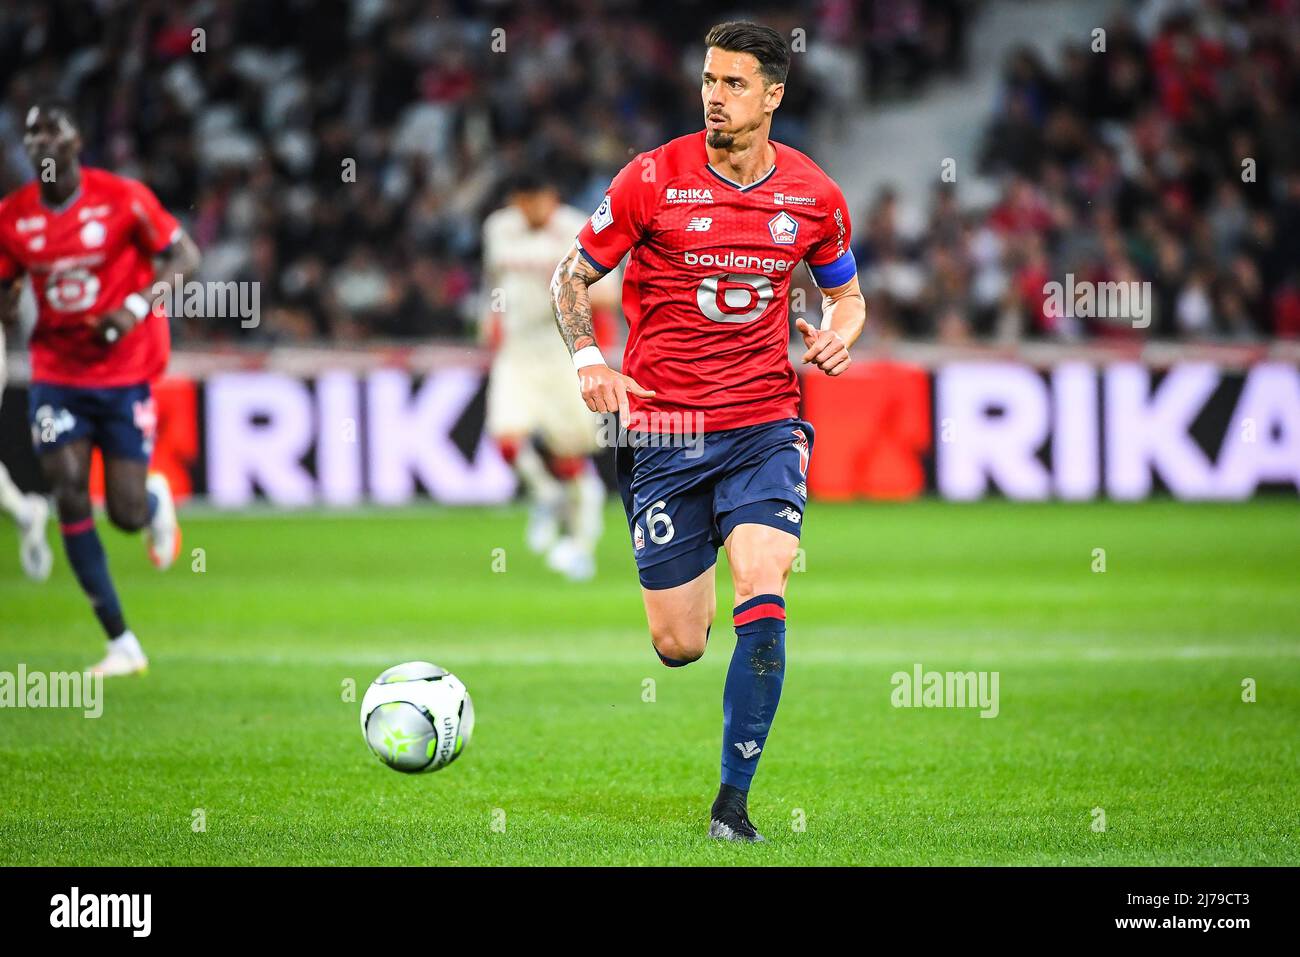 May 6, 2022, Villeneuve-d'Ascq near Lille, France: Jose FONTE of Lille  during the French championship Ligue 1 football match between LOSC Lille  and AS Monaco on May 6, 2022 at Pierre Mauroy